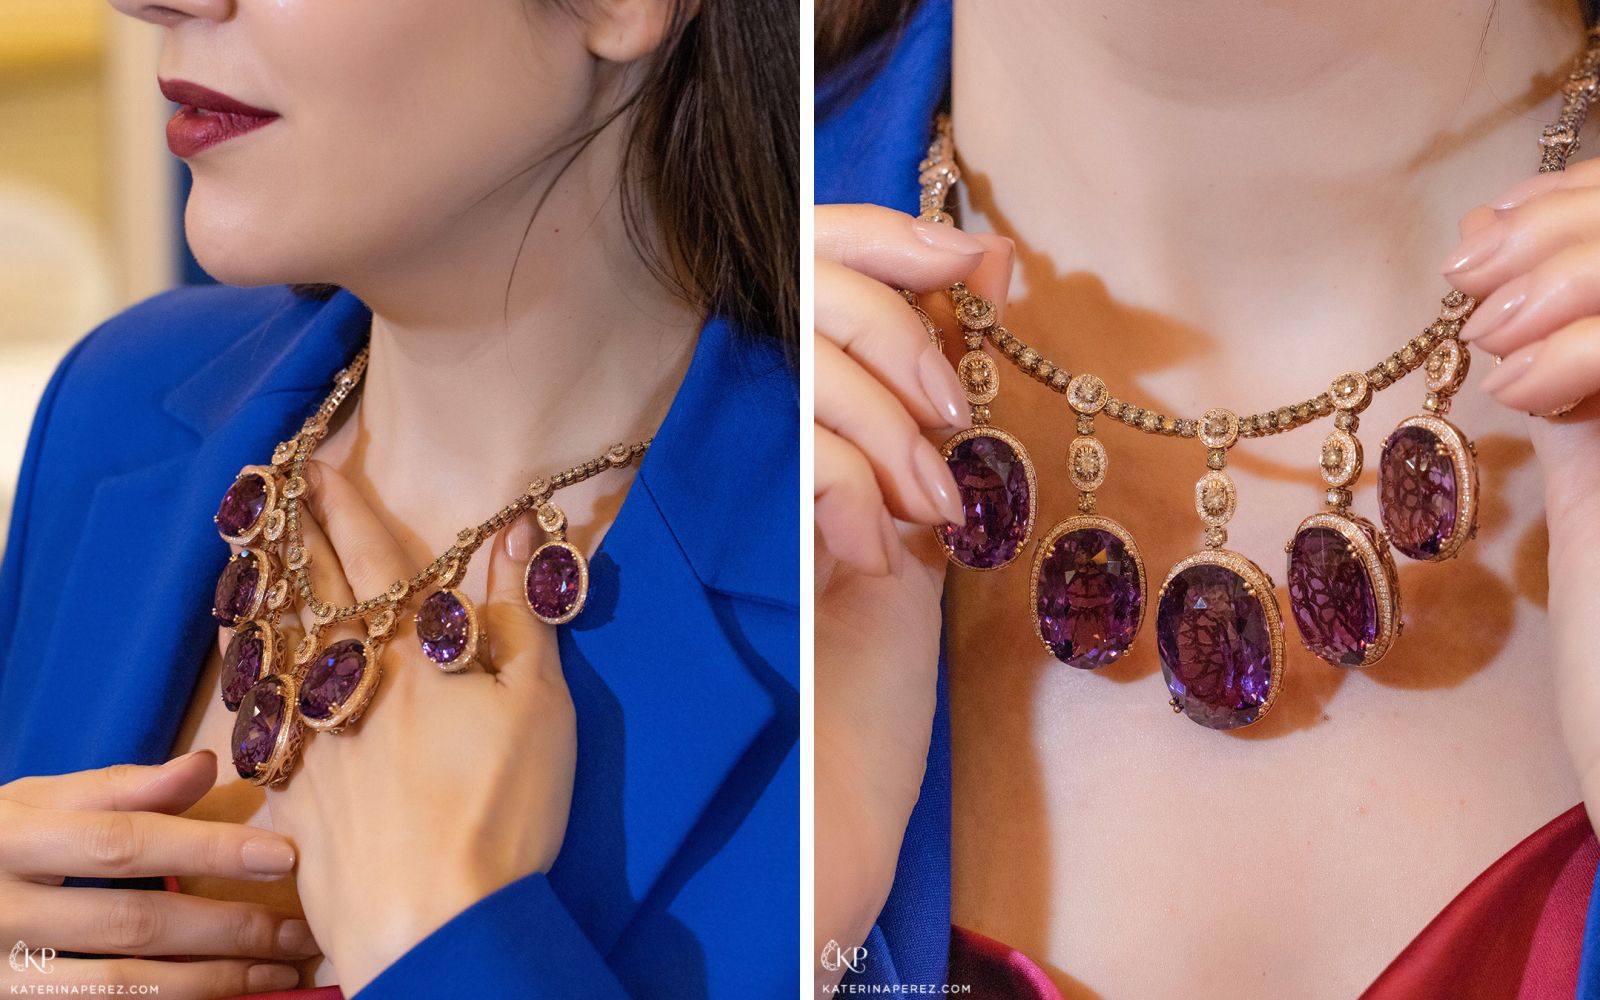 Katerina Perez wearing the Le Vian Chocolatier necklace in Strawberry Gold, features 192 carats of grape amethysts, 30 carats of chocolate diamonds and three carats of 'vanilla diamonds'